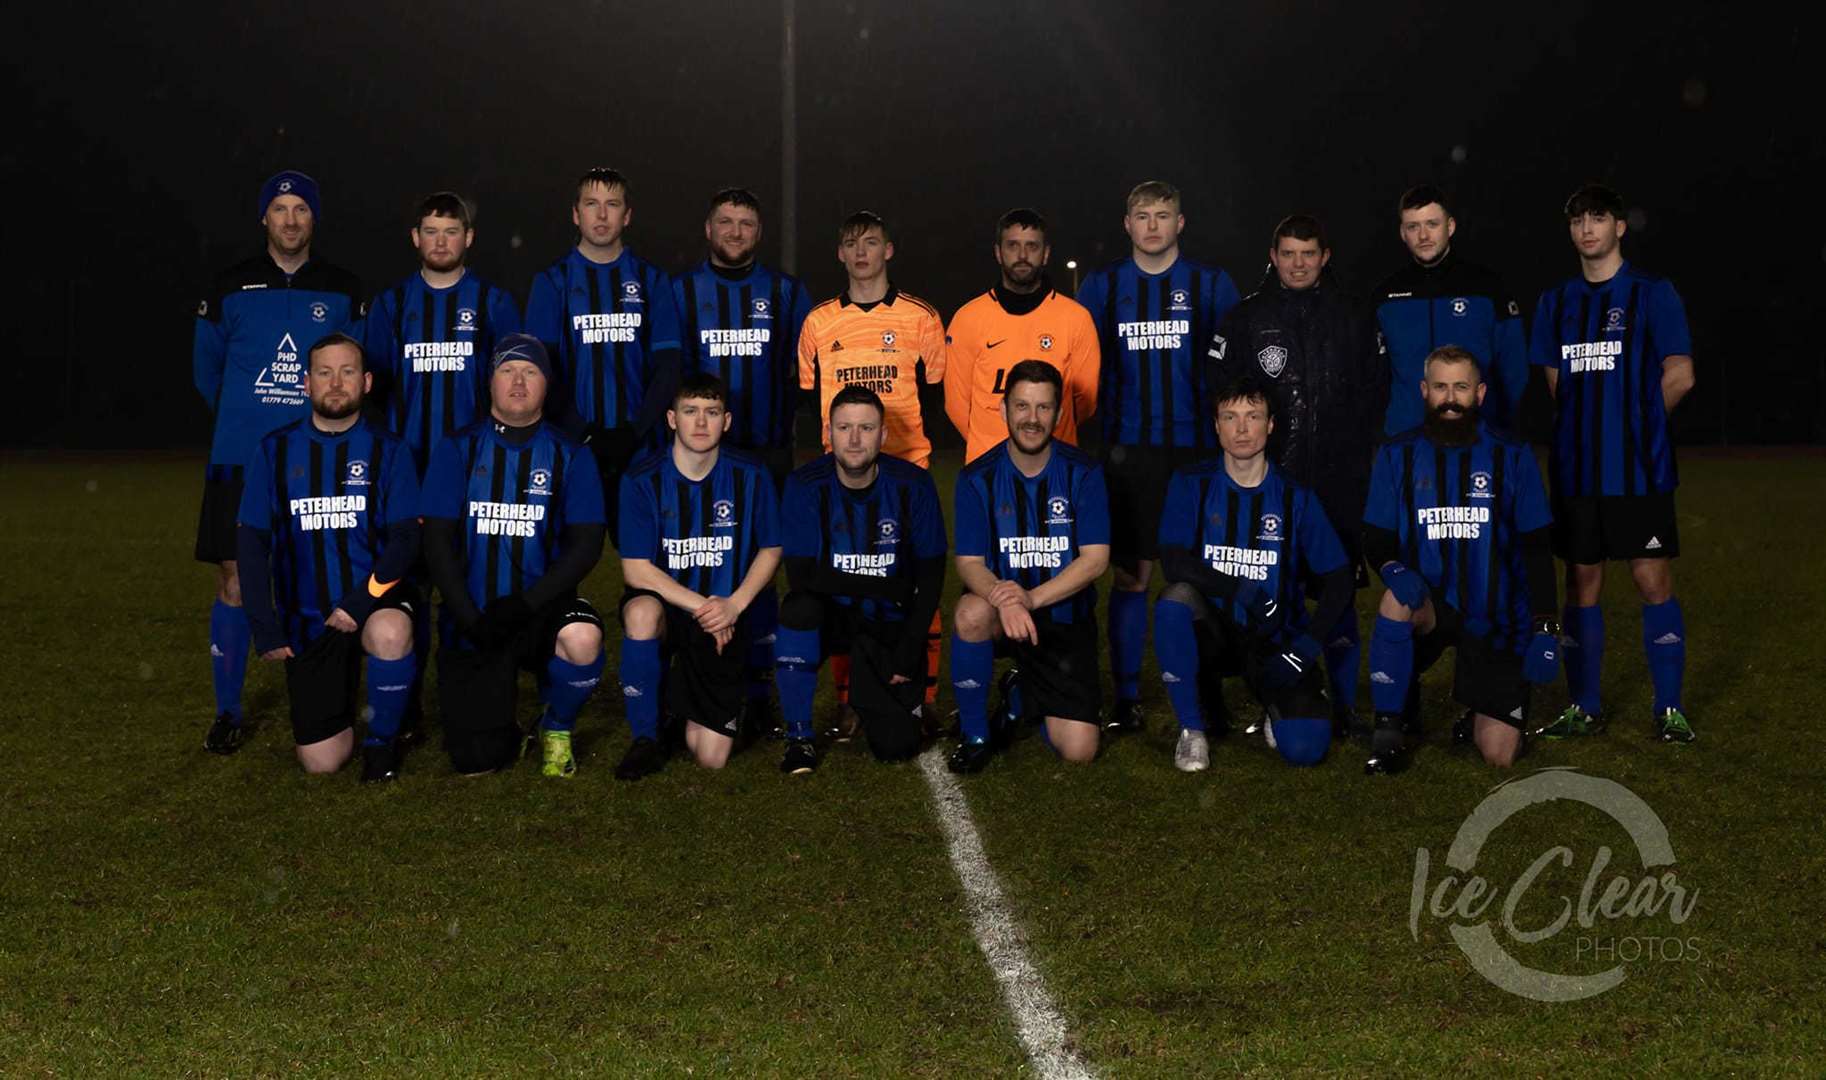 Peterhead United FC took on the challenge to raise money for Clan Cancer Support. Image credit: Ice Clear Photos/Peterhead United